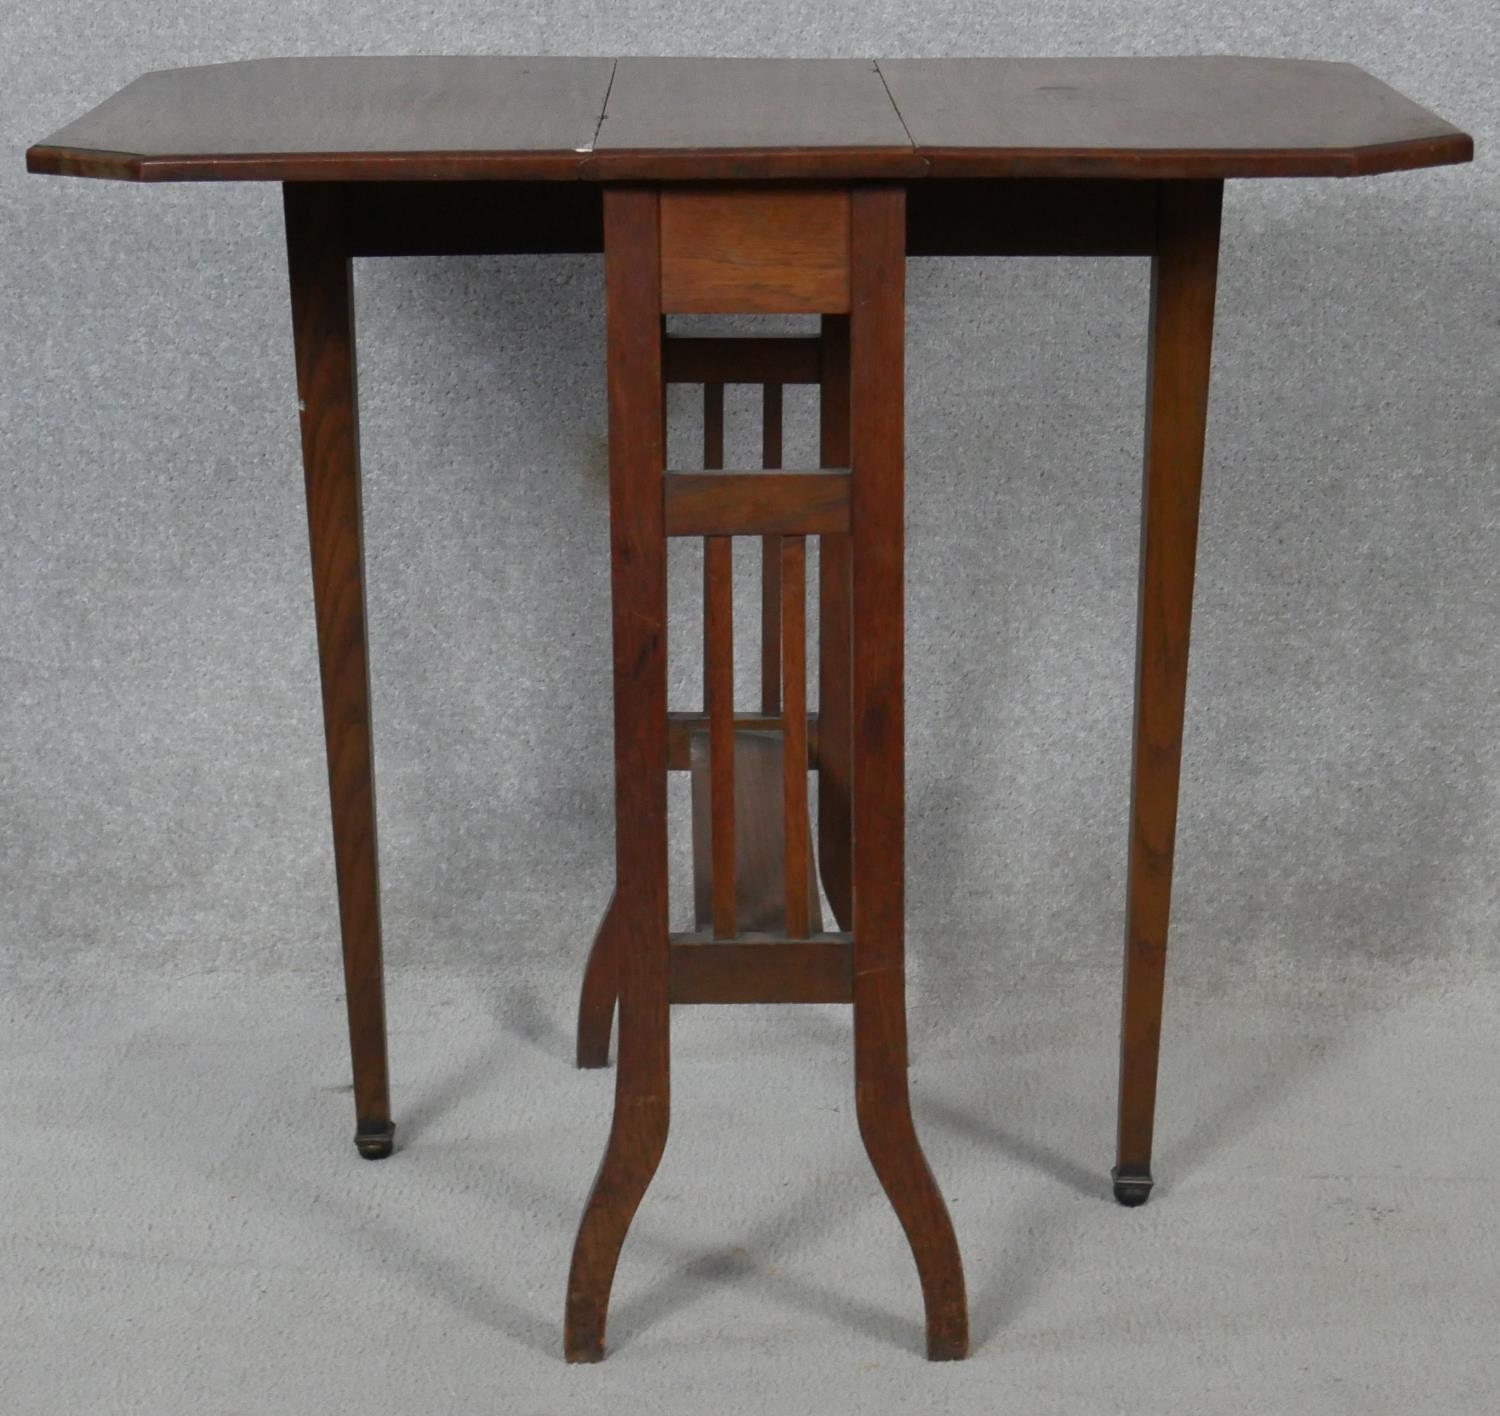 A late 19th century mahogany Sutherland table with gateleg action. H.77.5 L.76 W.55.5cm - Image 2 of 3